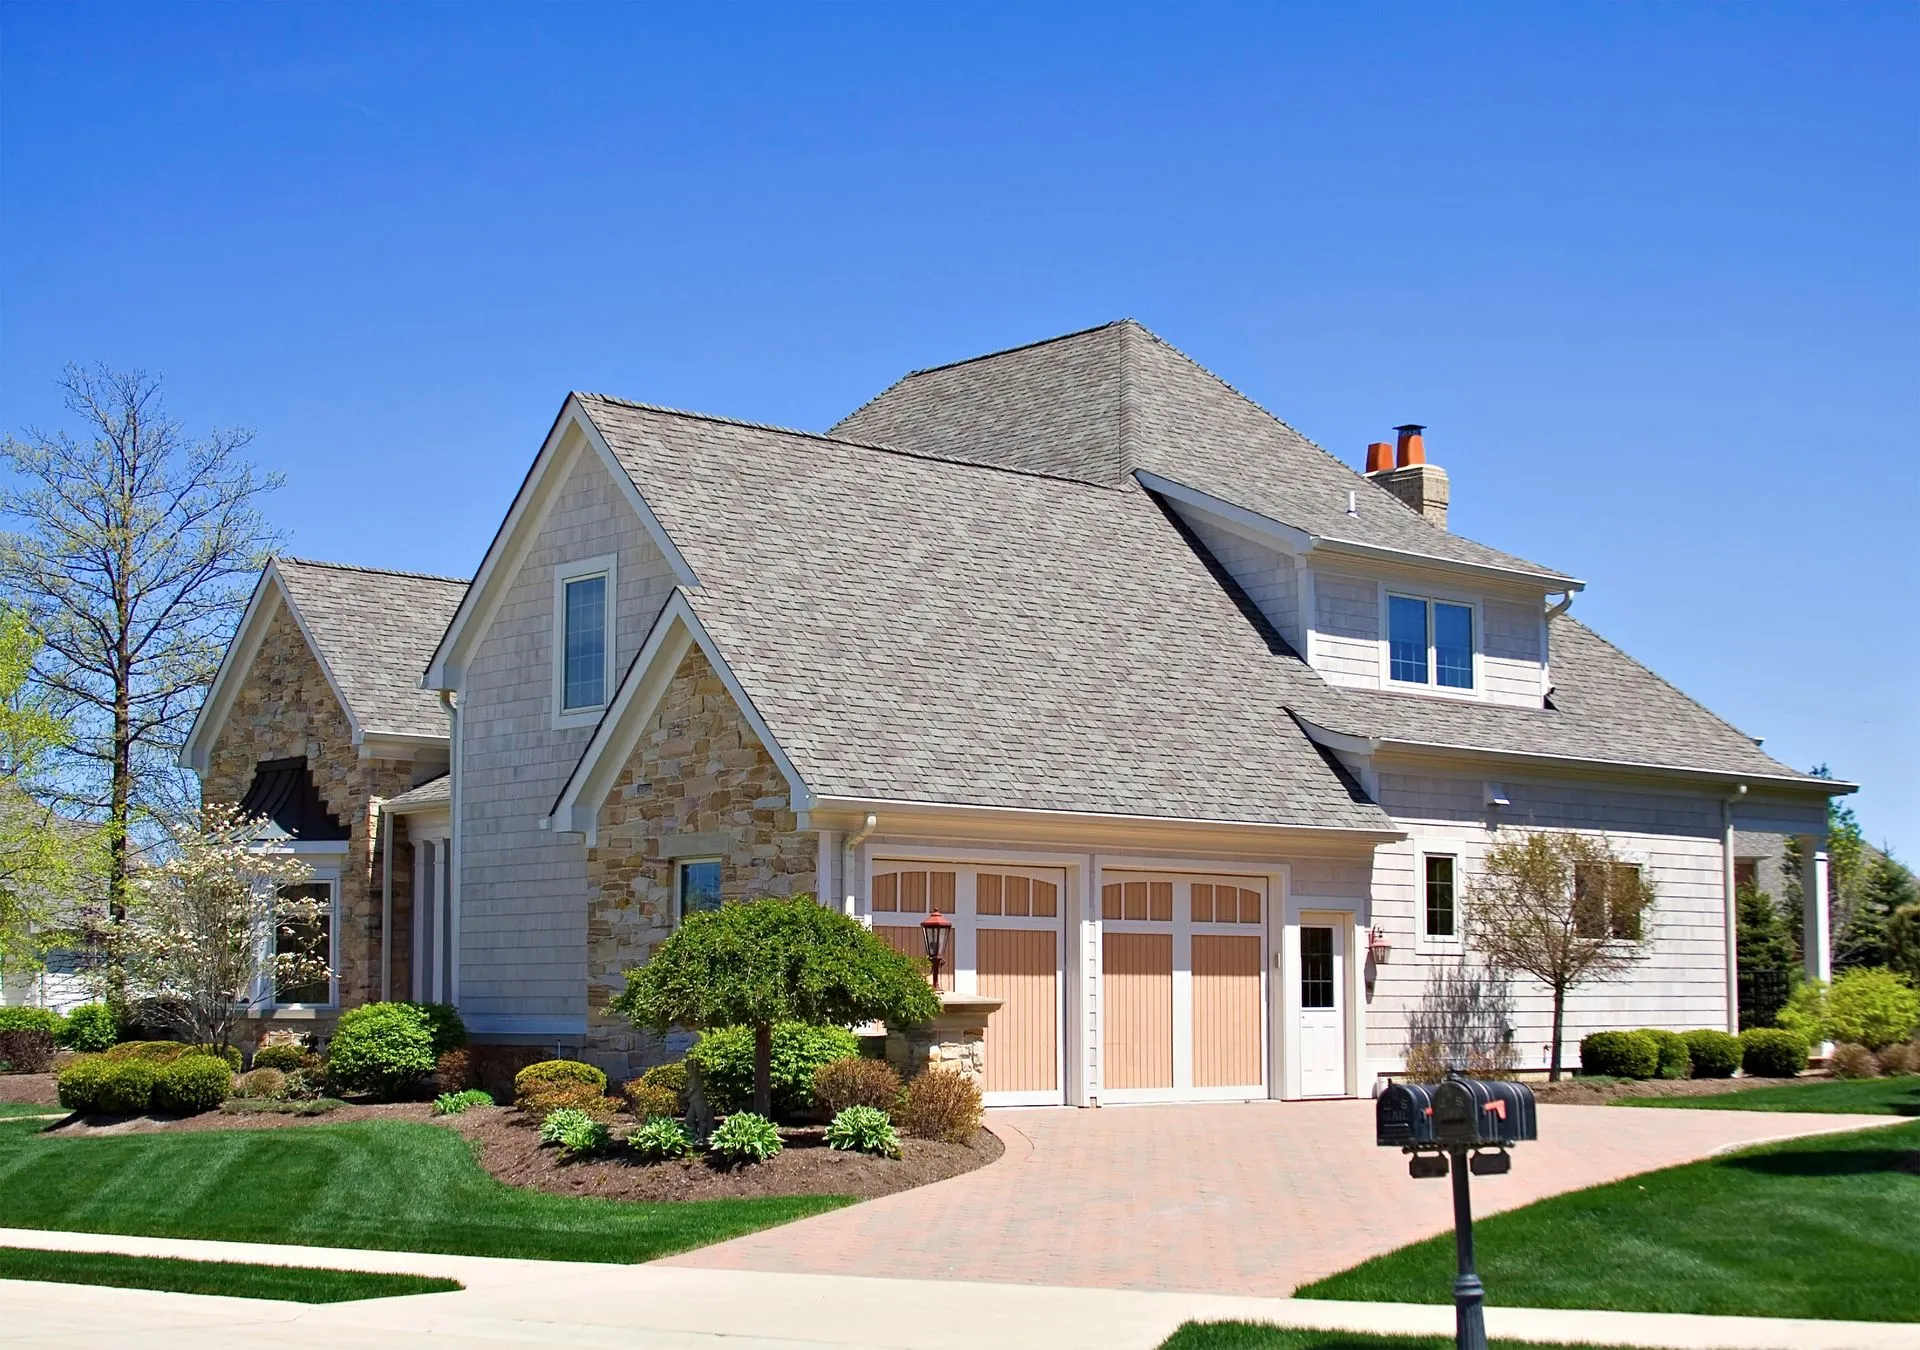 3 Services Your Roofing Contractor Can Provide